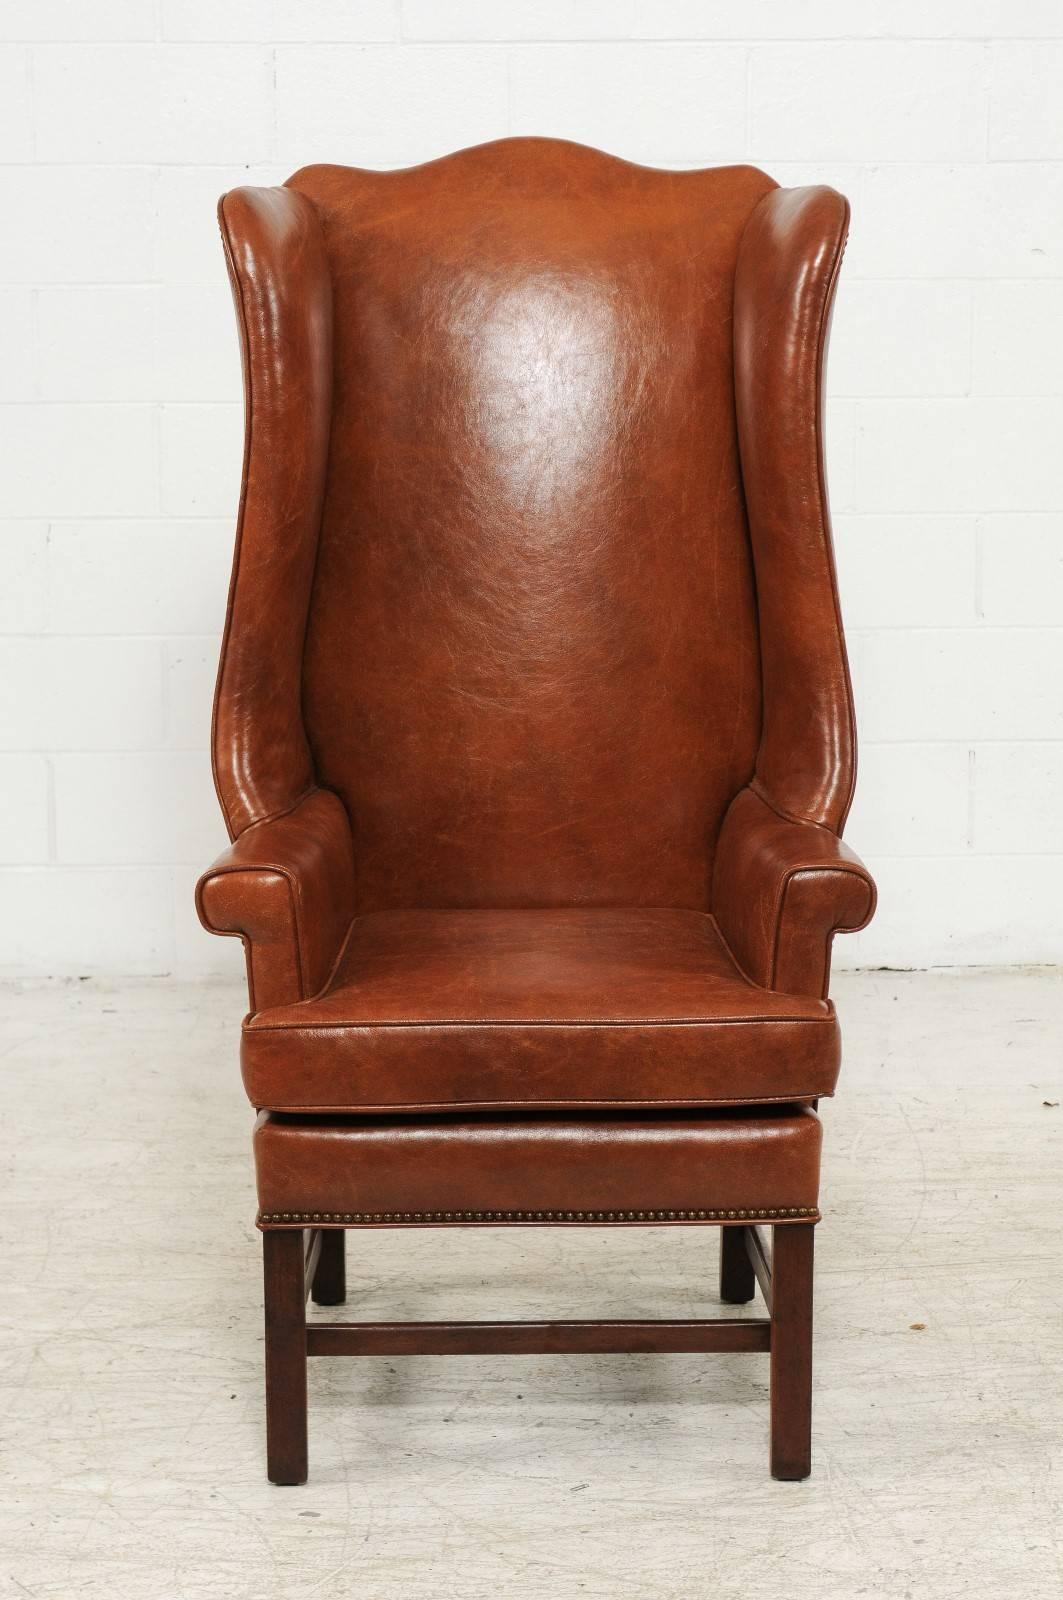 An English vintage brown leather wingback chair with straight legs and side stretchers from the mid-20th century. This English wingback chair is upholstered in a warm brown leather, accented with a discreet brass nailhead trim on the outside. The